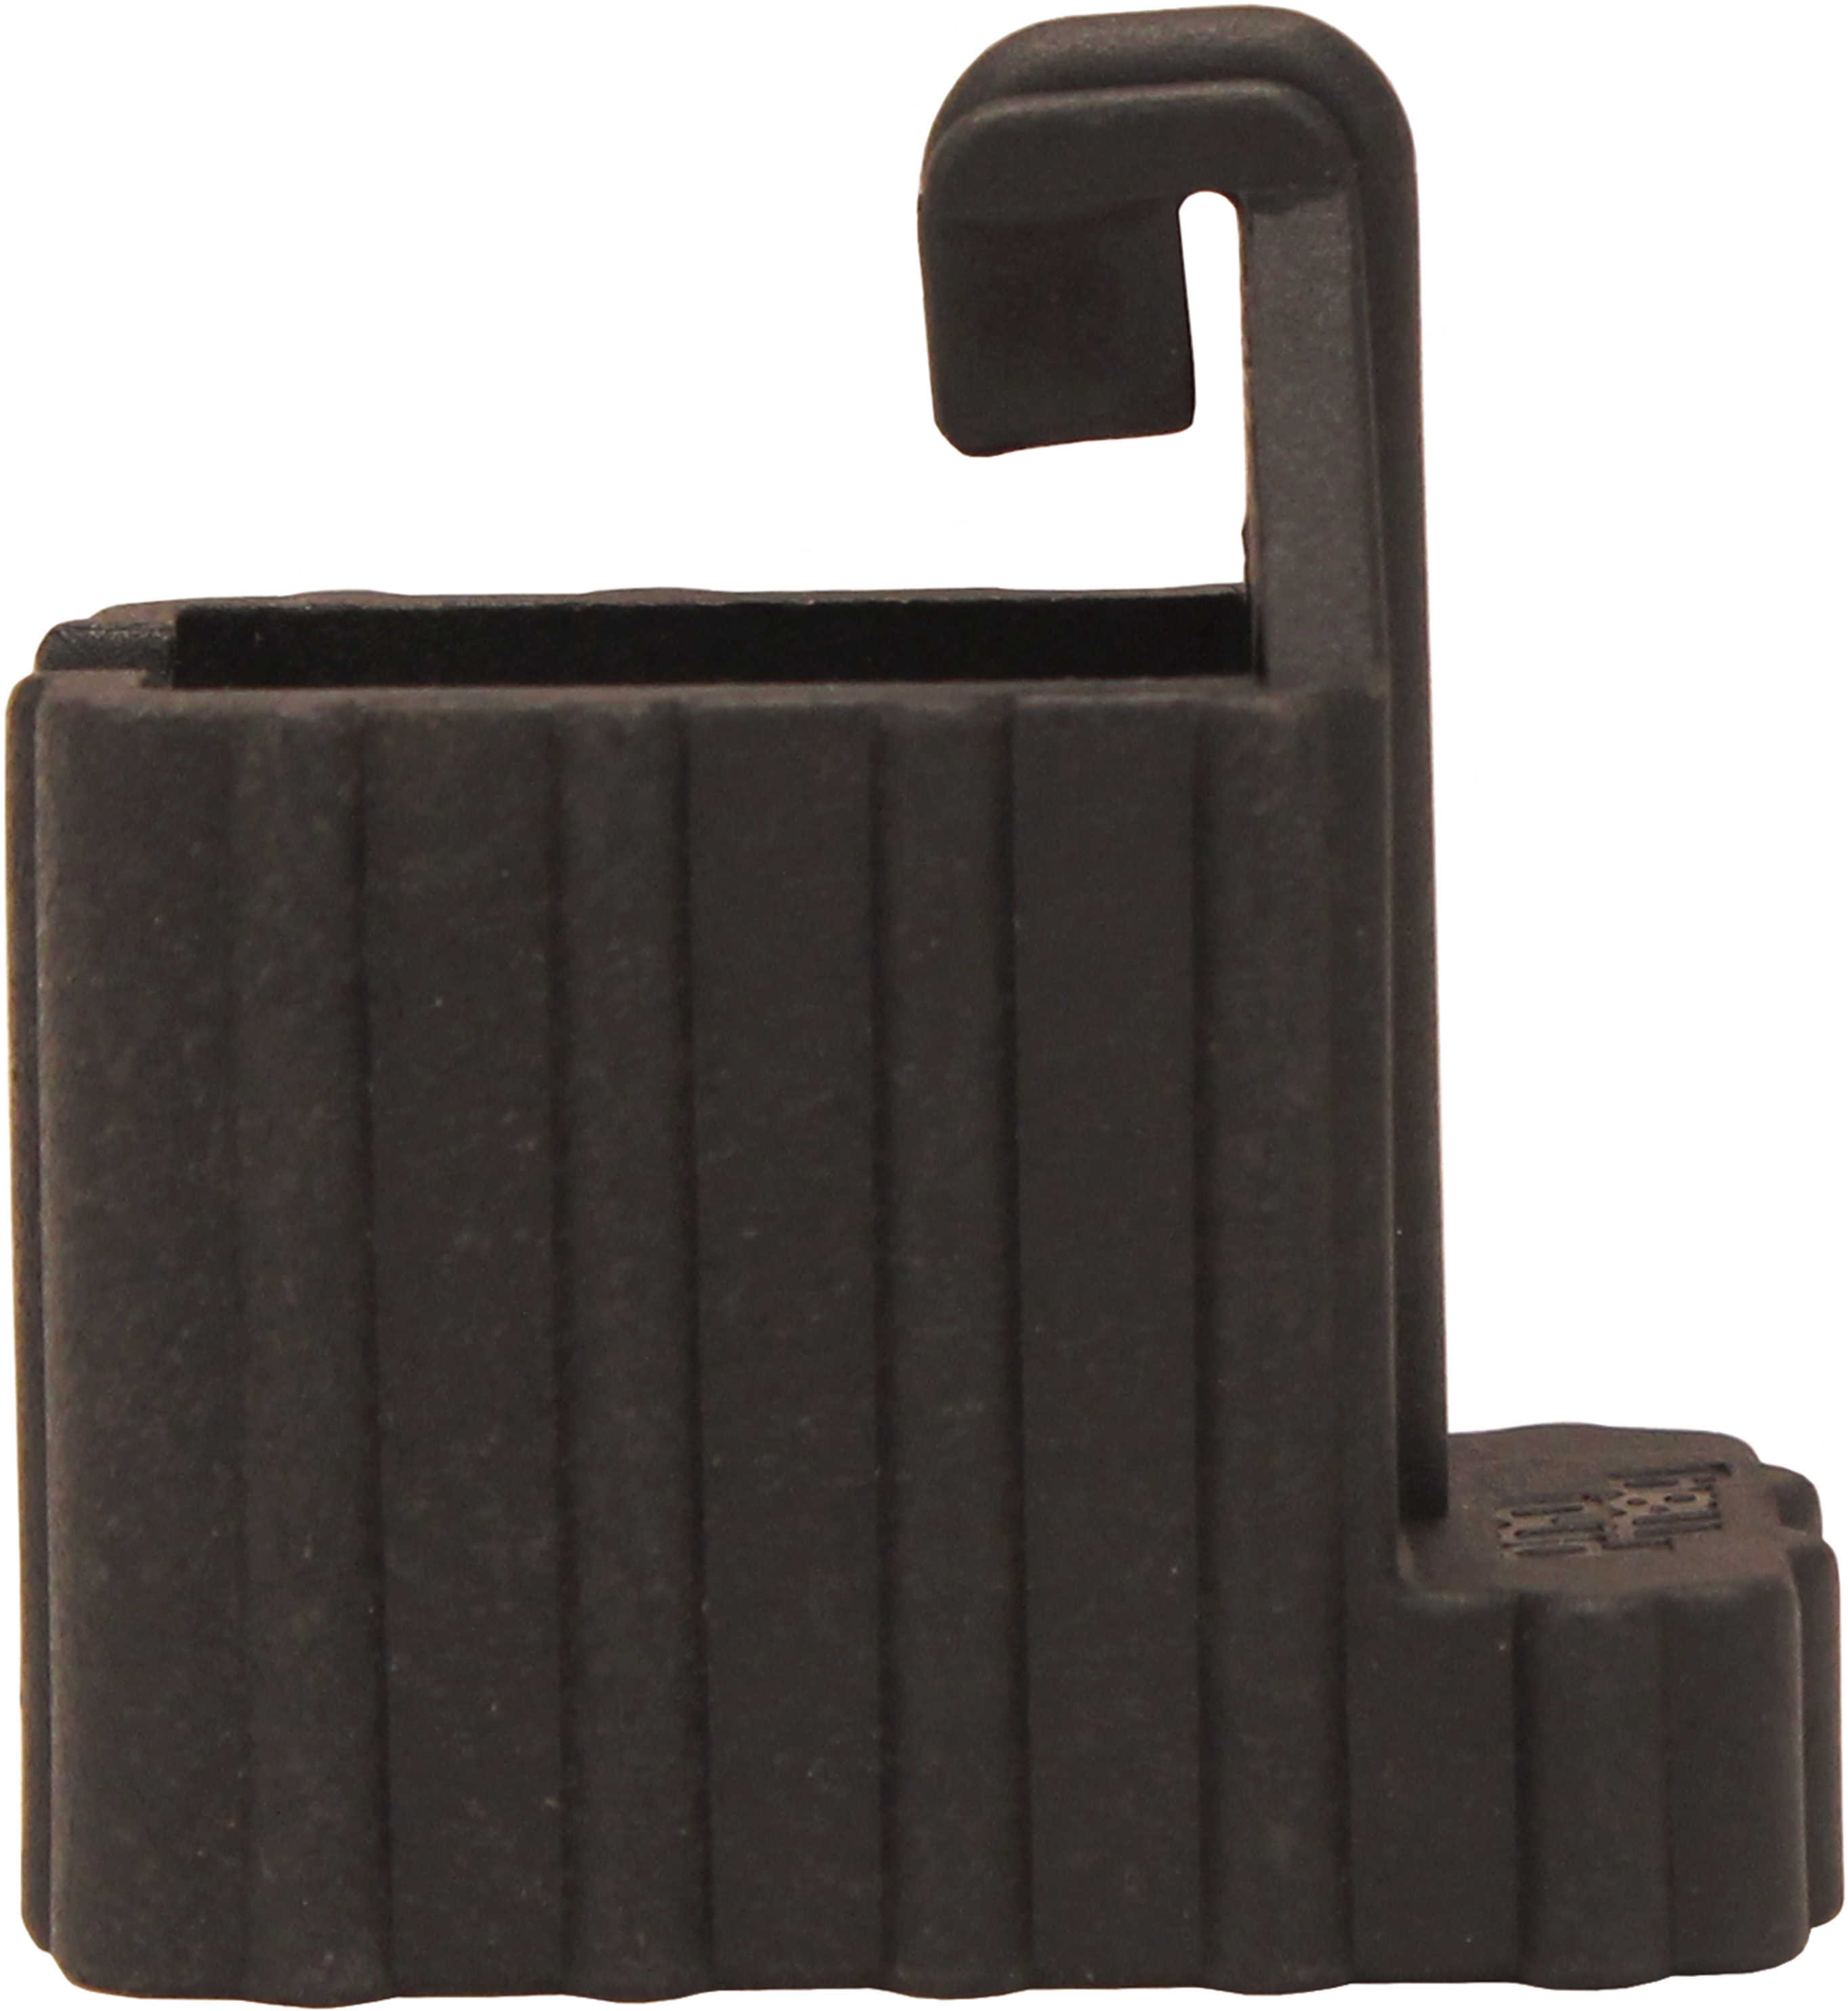 PROMAG 9MM-40 S&W MAG LOAD BLK POLY